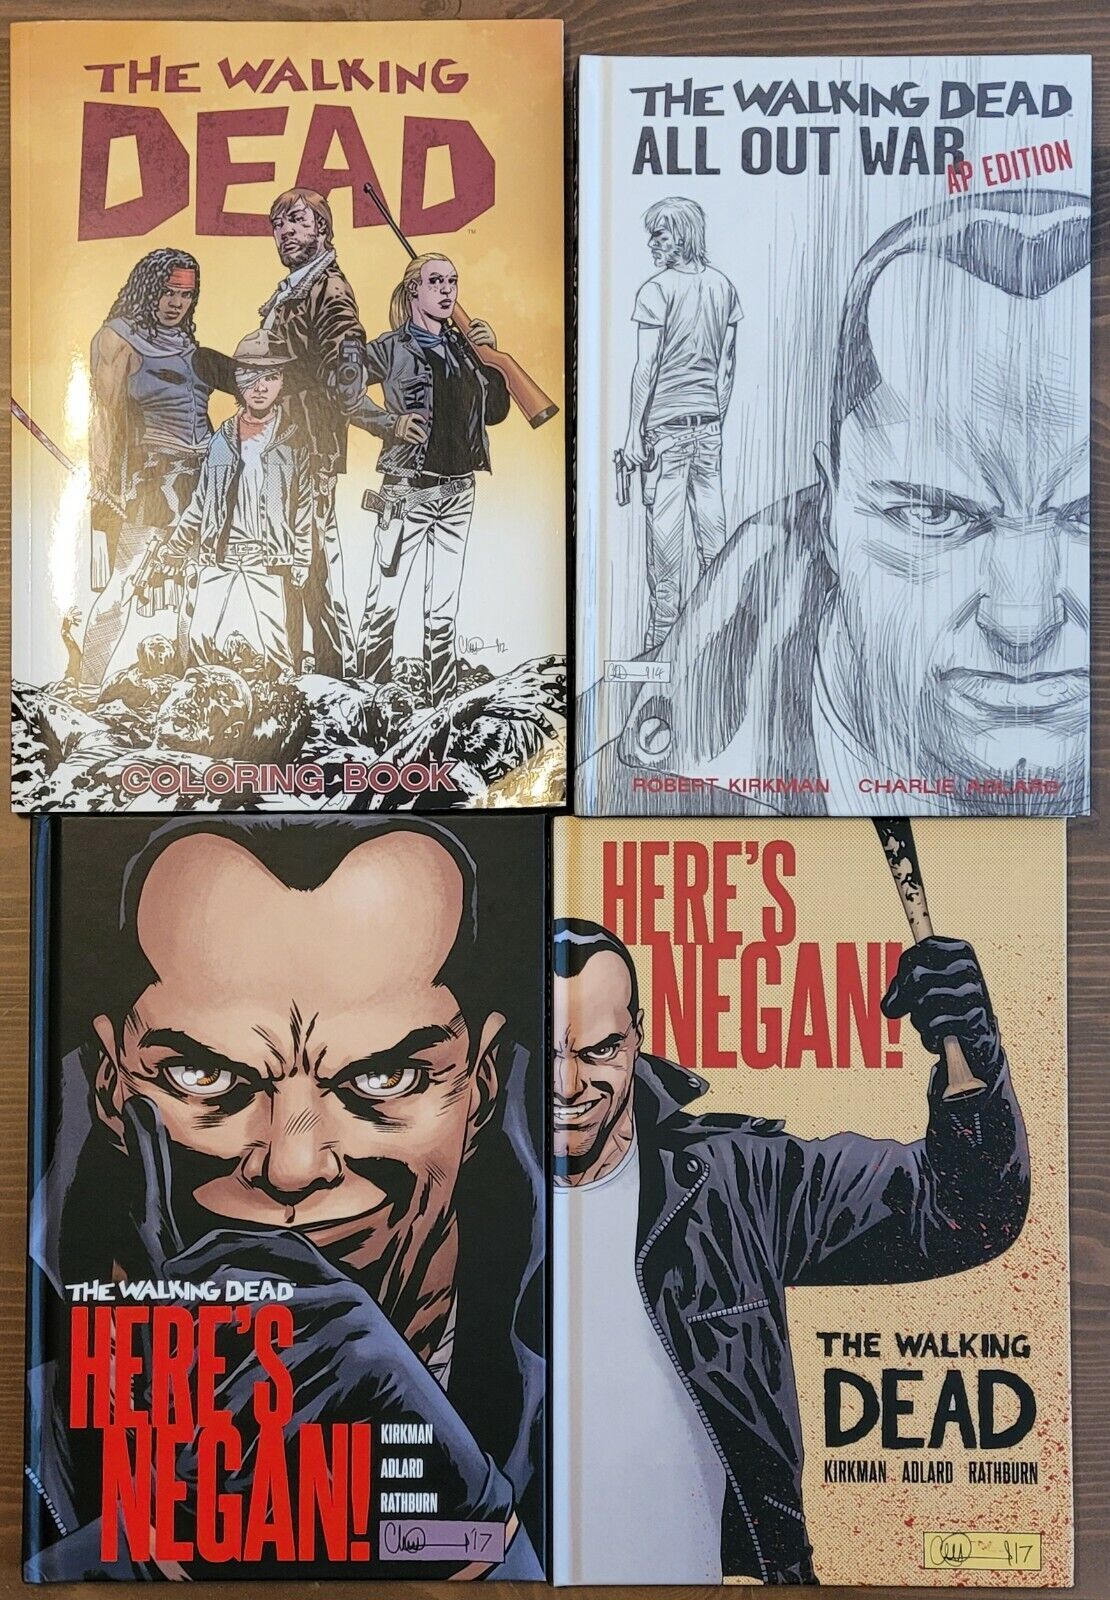 The Walking Dead 4 Book Lot Including All Out War AP + 2 Here's Negan HC Books